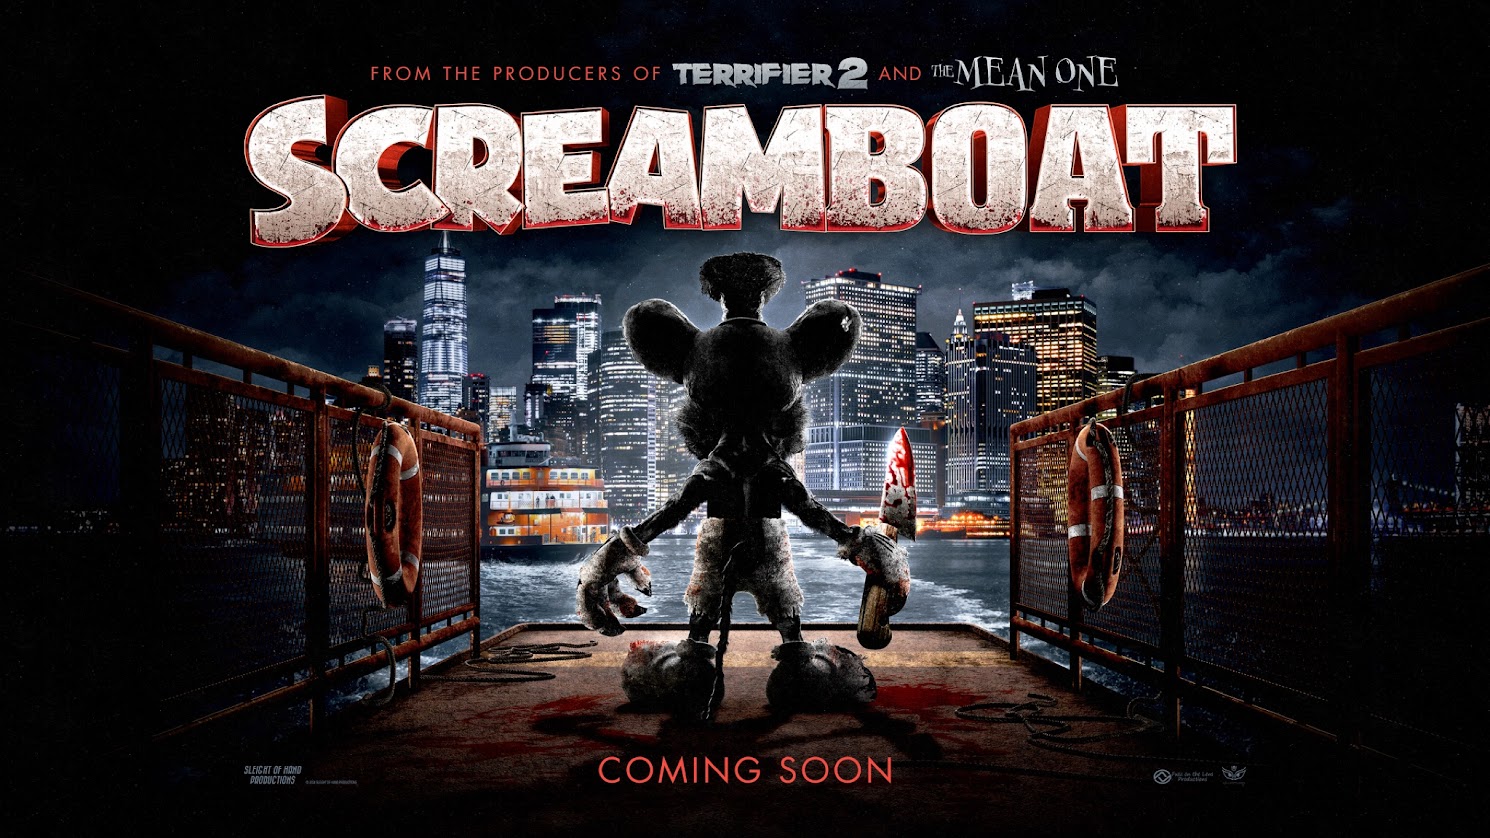 Steamboat Willie Horror Movie Hits Theaters In 2025